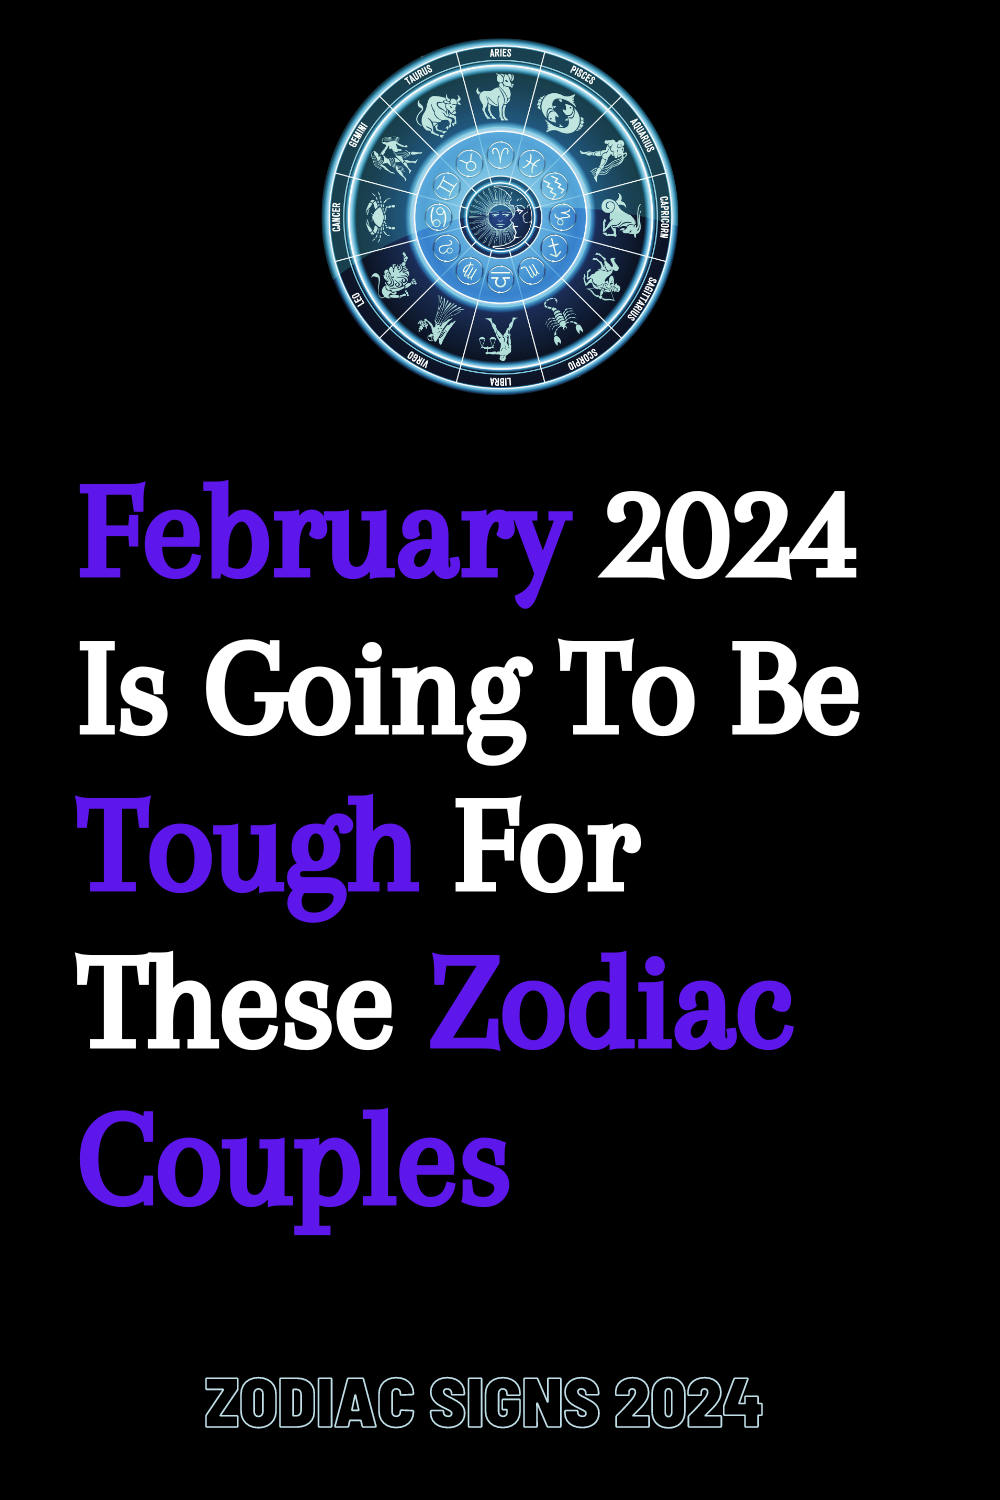 February 2024 Is Going To Be Tough For These Zodiac Couples